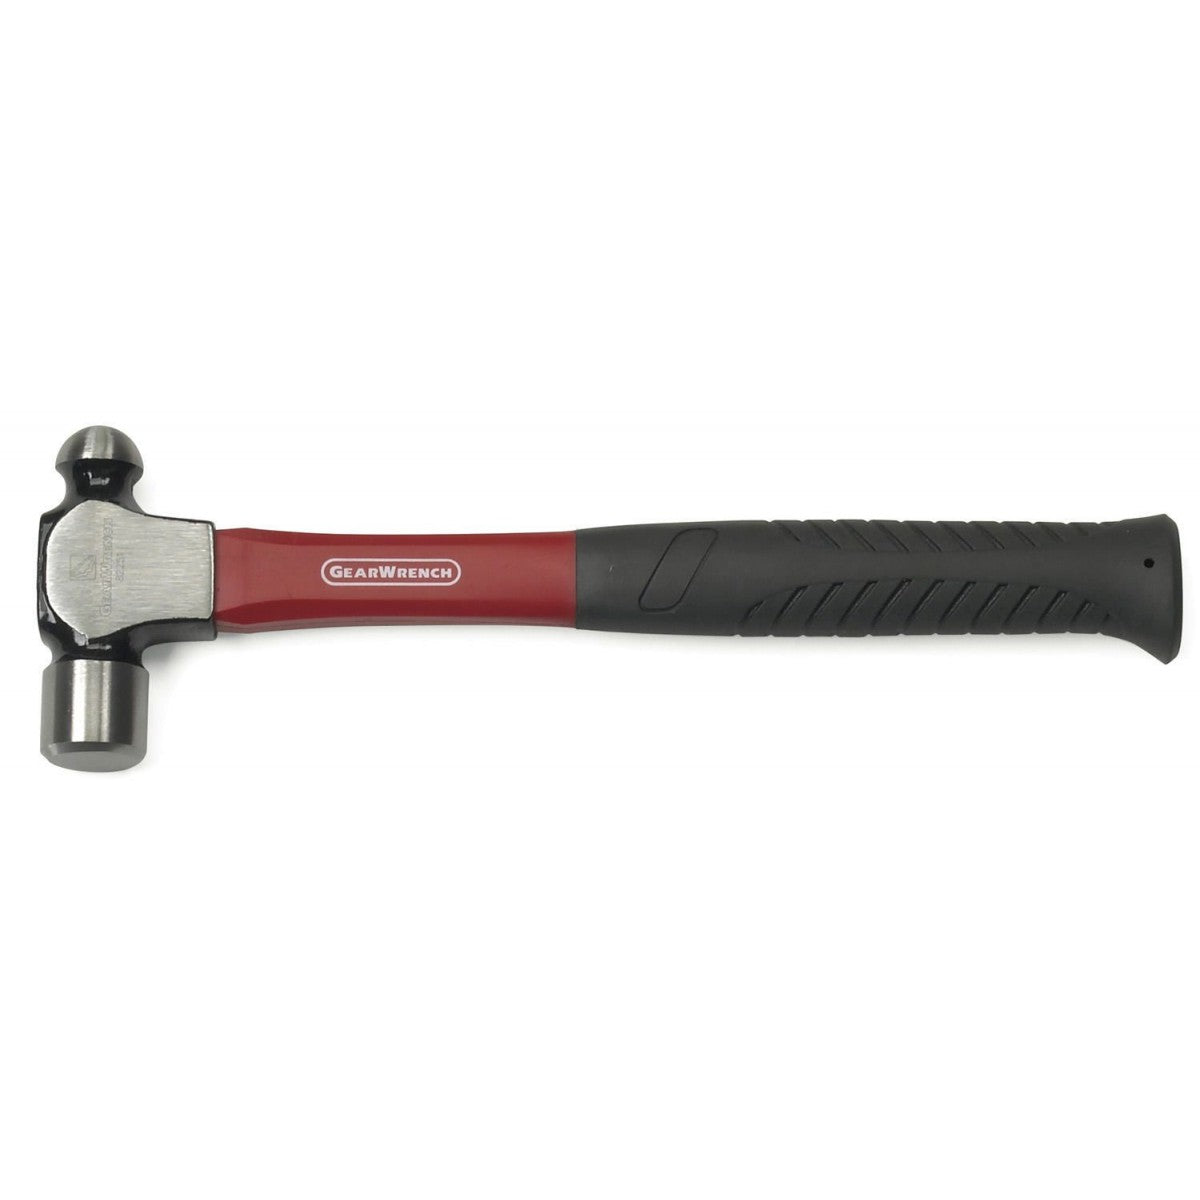 16Oz Ball Pein Hammer with Glass Handle 82251 by Gearwrench